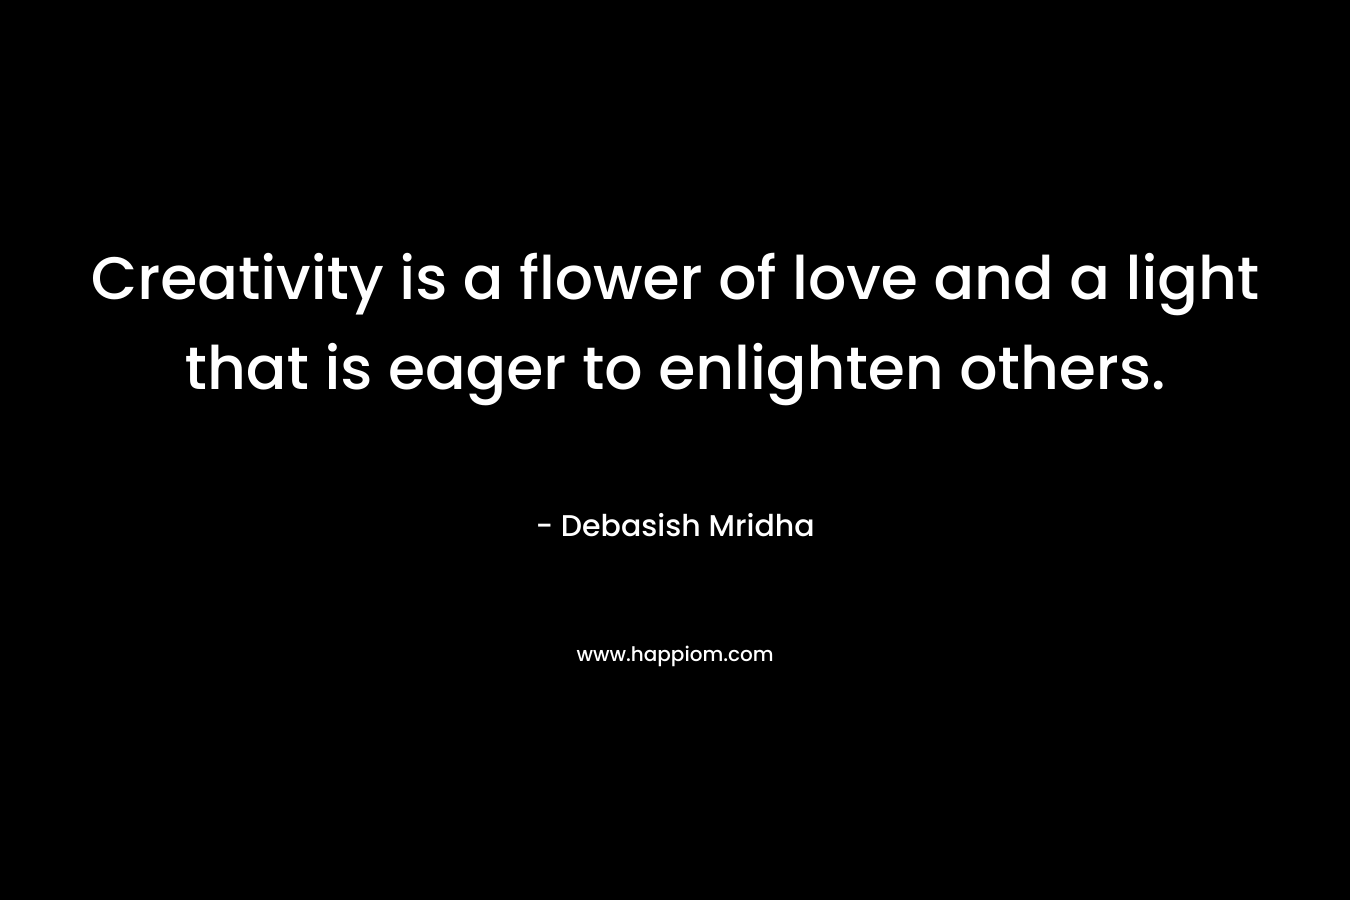 Creativity is a flower of love and a light that is eager to enlighten others.